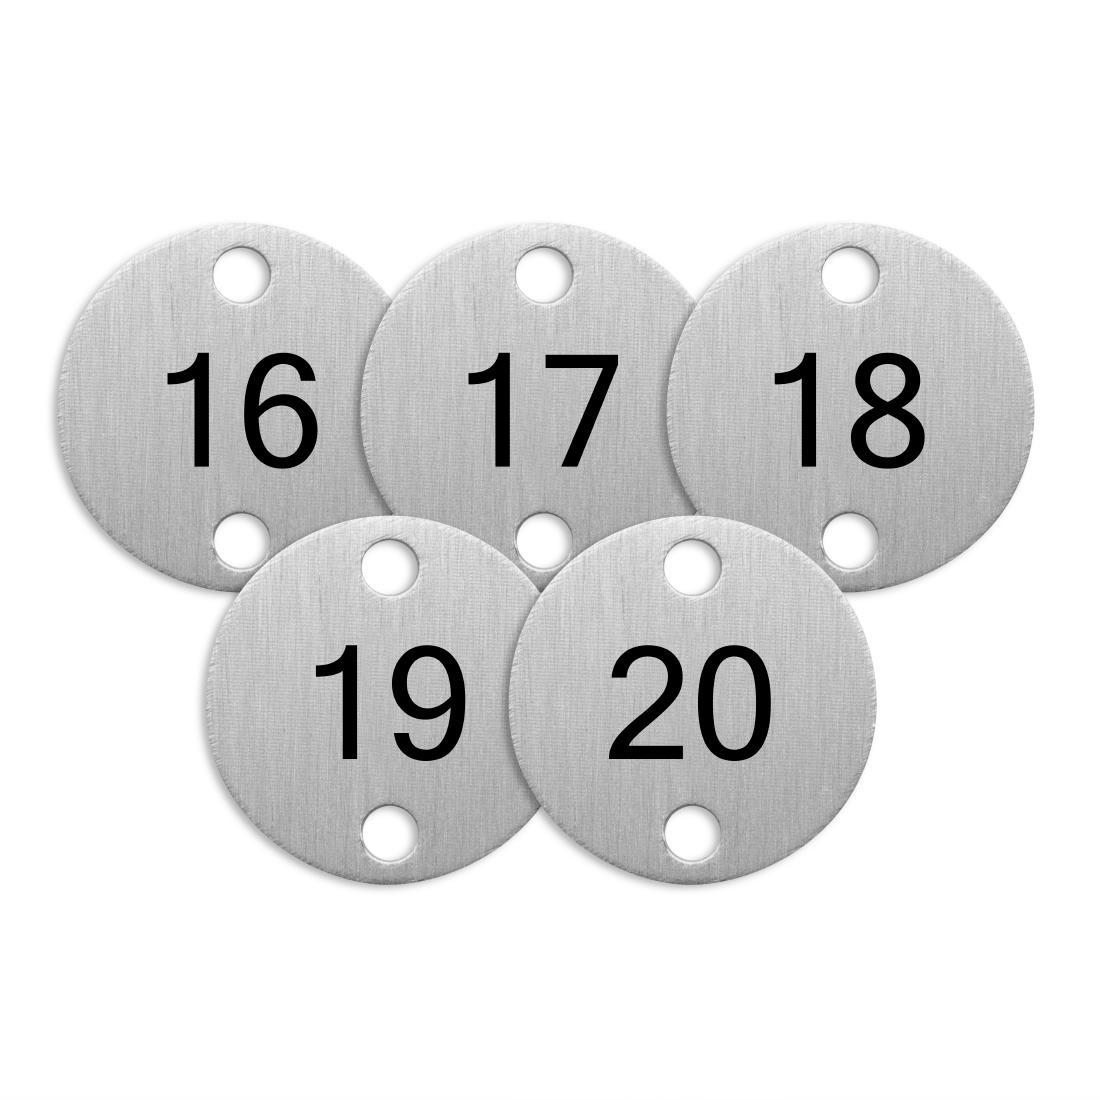 Bolero Table Numbers Silver (16-20) - DY773  - 3